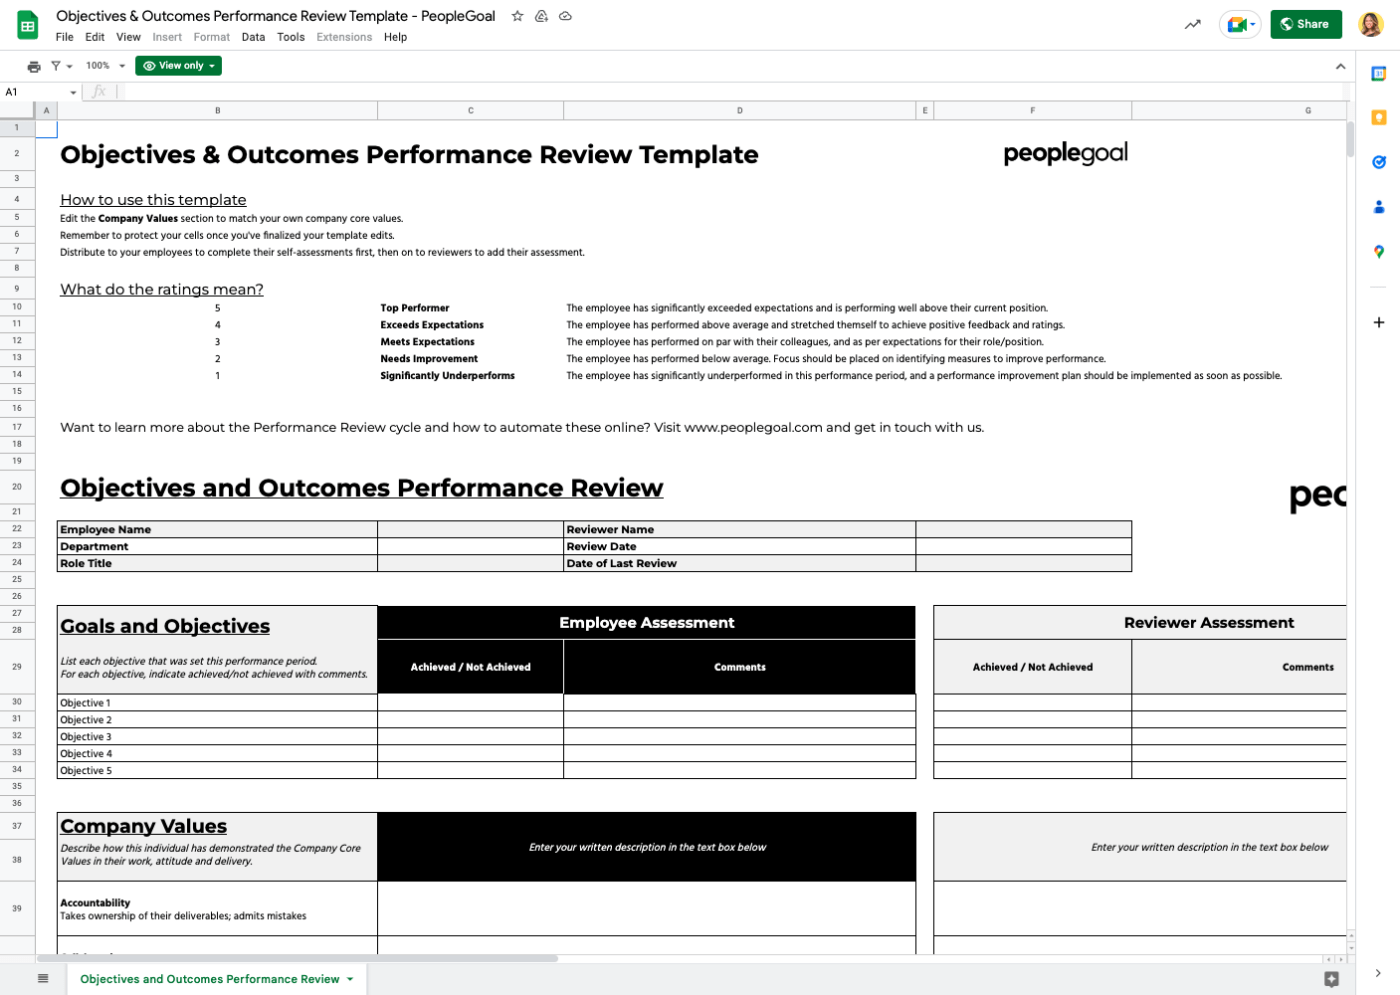 Google Sheets Objectives and Outcomes Performance Review Template